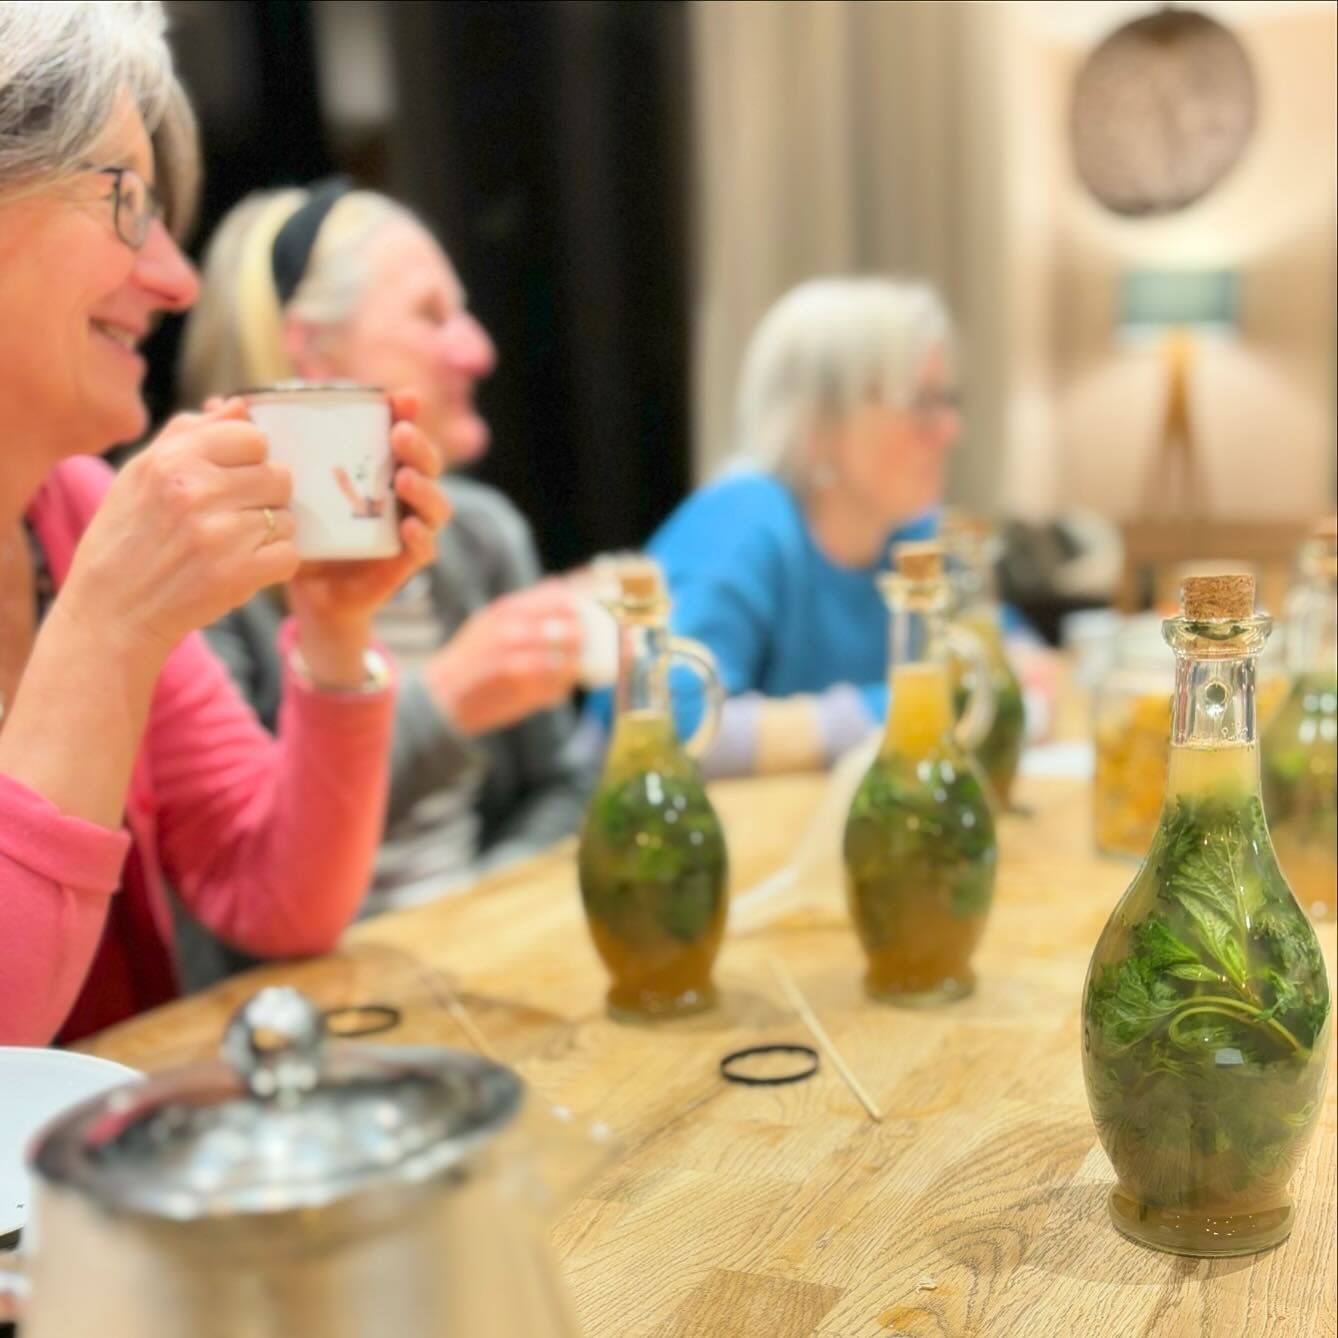 🤍 Good vibes 
💚 Great herb chat 
💛 Sharing knowledge and taking time:

When you connect with the herbs they remind you of wisdom already in your heart. 

Thank you so much Marion for asking me to host this gathering for a group of friends. We made